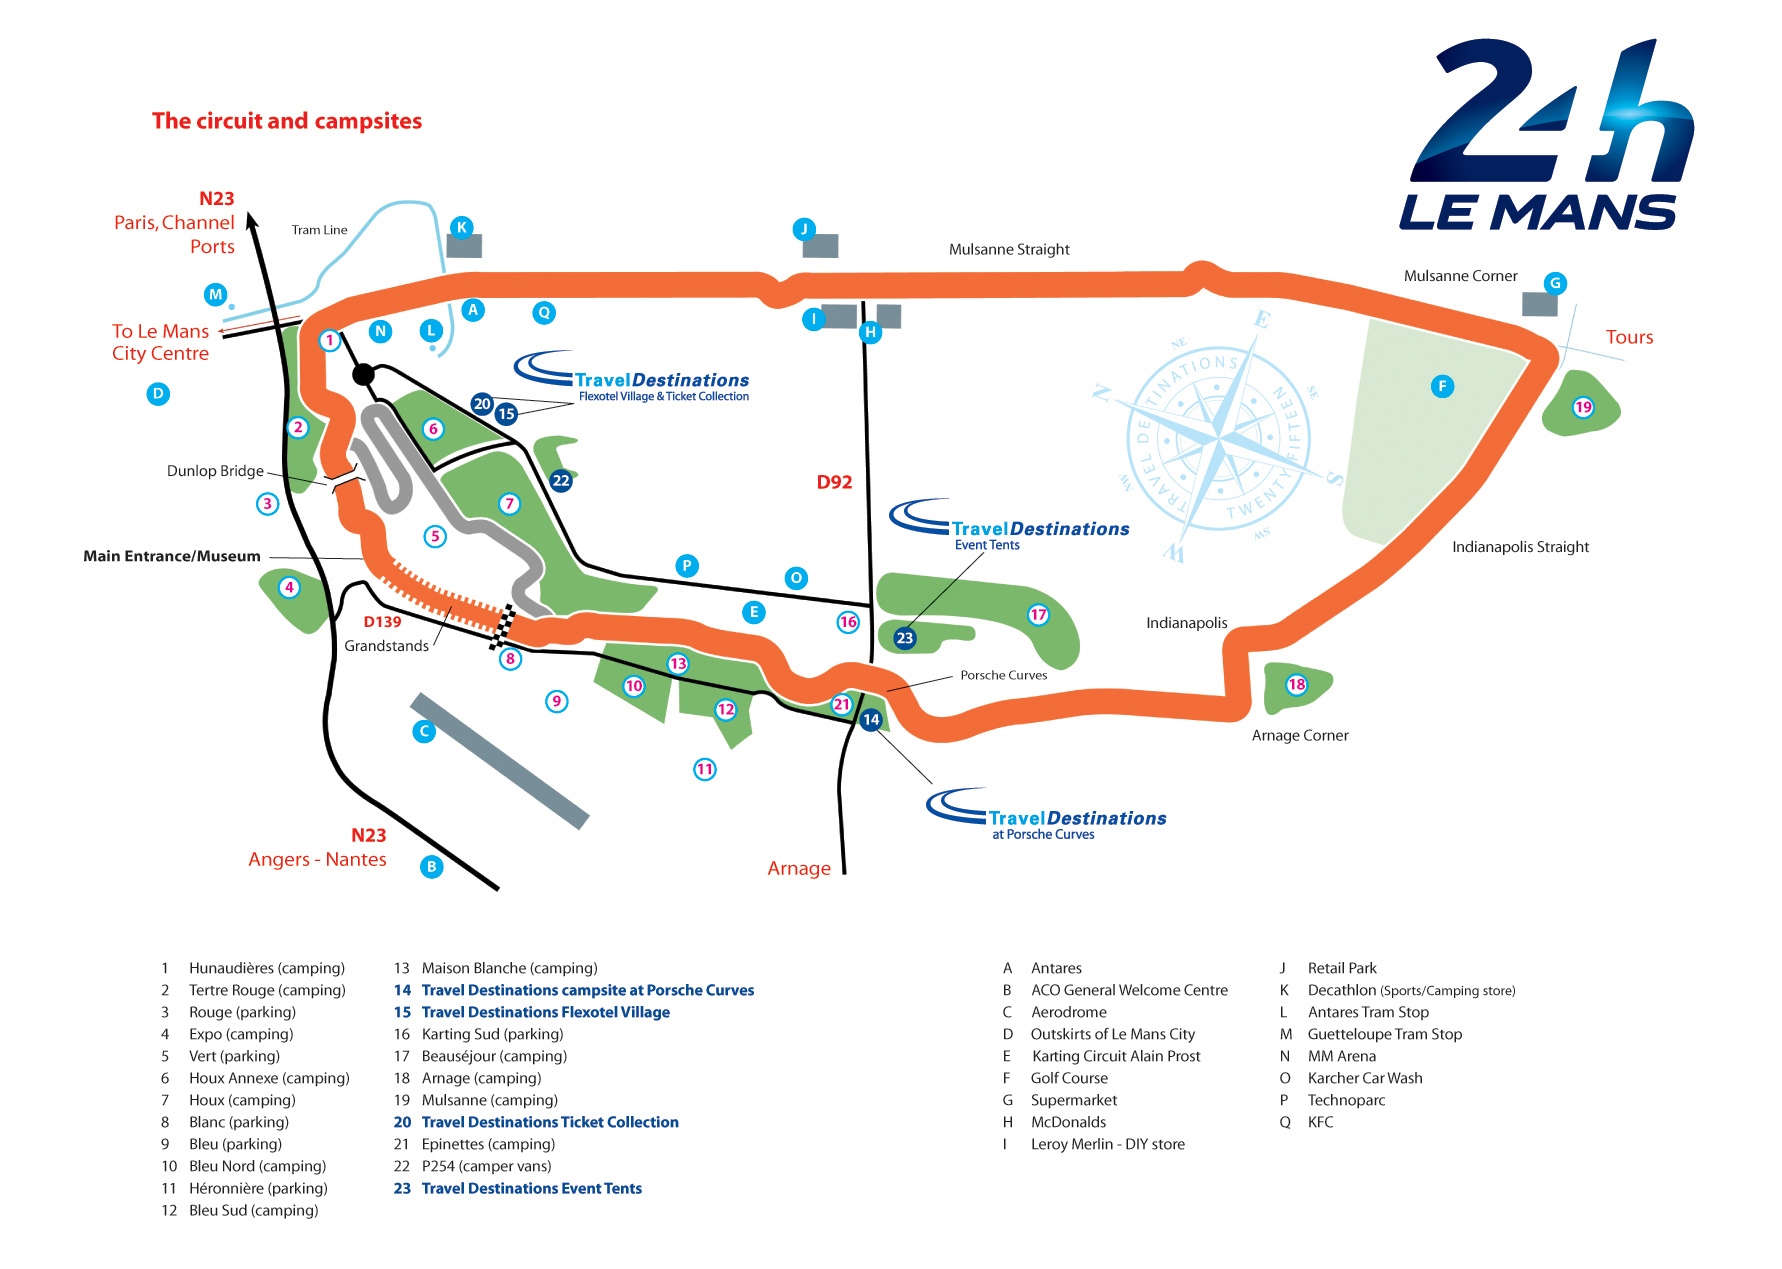 Le Mans 2017 tickets, camping & travel for Le Mans 24 Hours